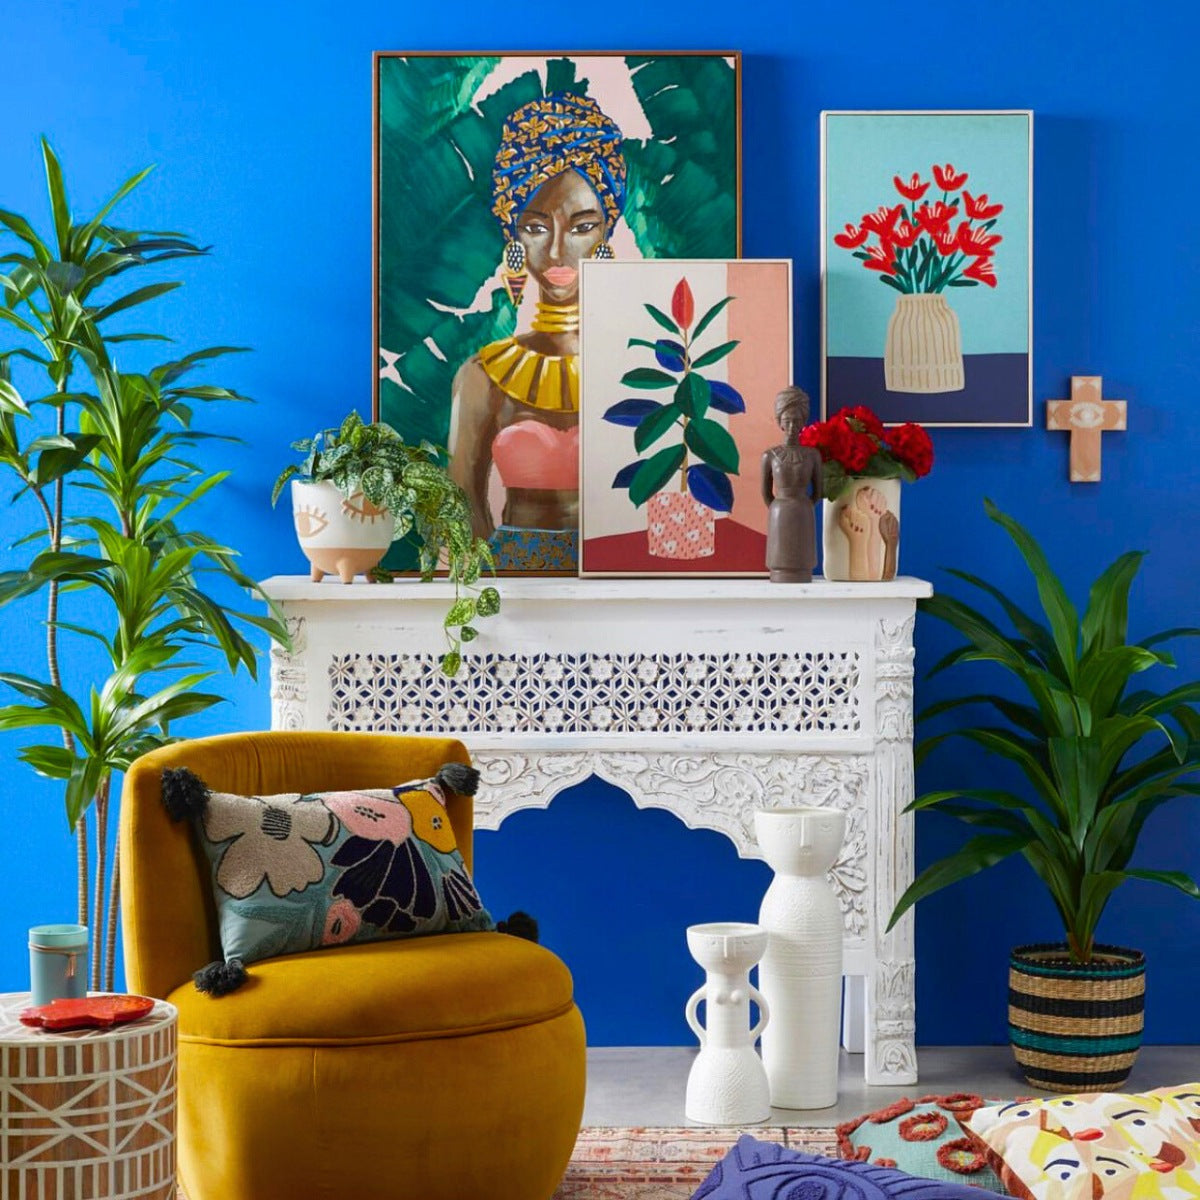 Artistic depiction of Nia in a colorful, quirky setting with hand-painted touches, framed in 60x80cm timber frame.